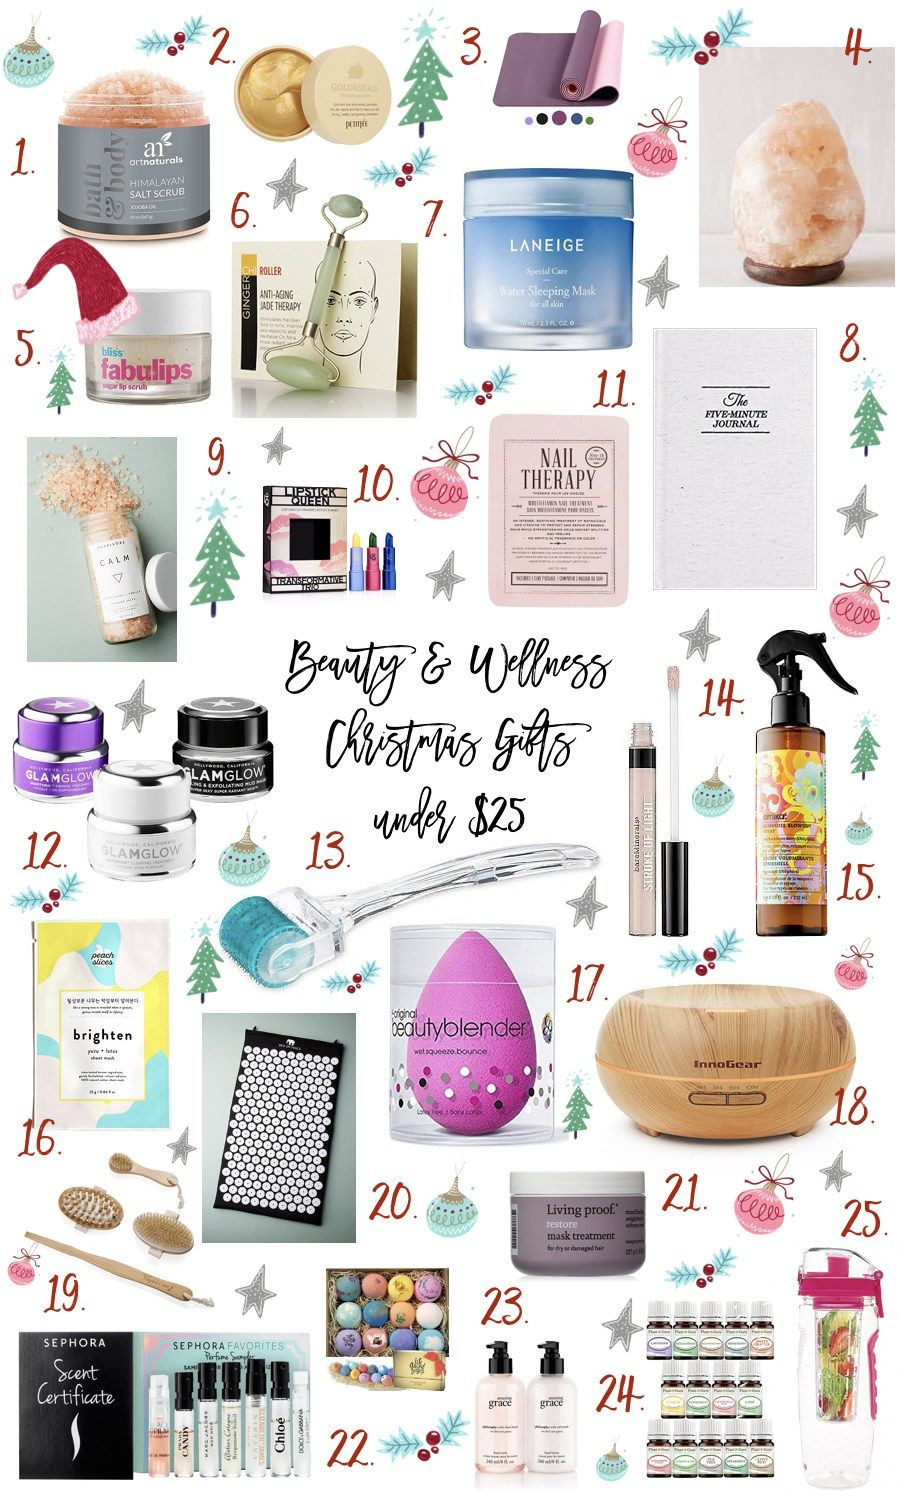 $25 Christmas Gift Ideas
 25 Beauty and Wellness Gifts Under $25